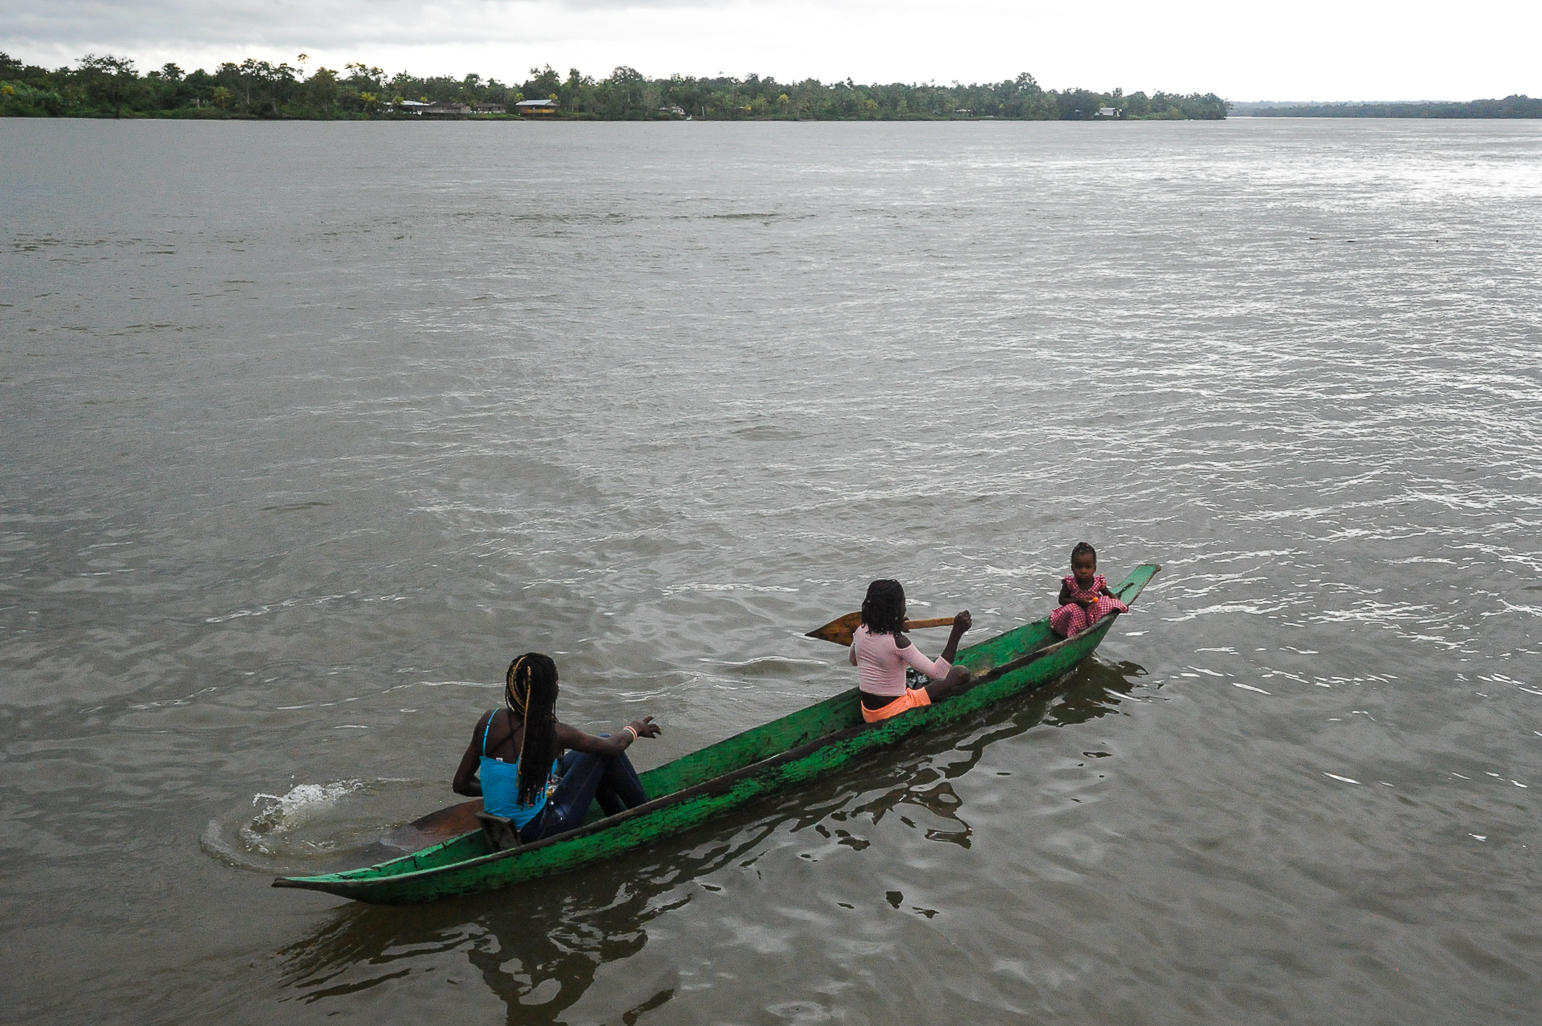 A woman and two children rowing a canoe on the river